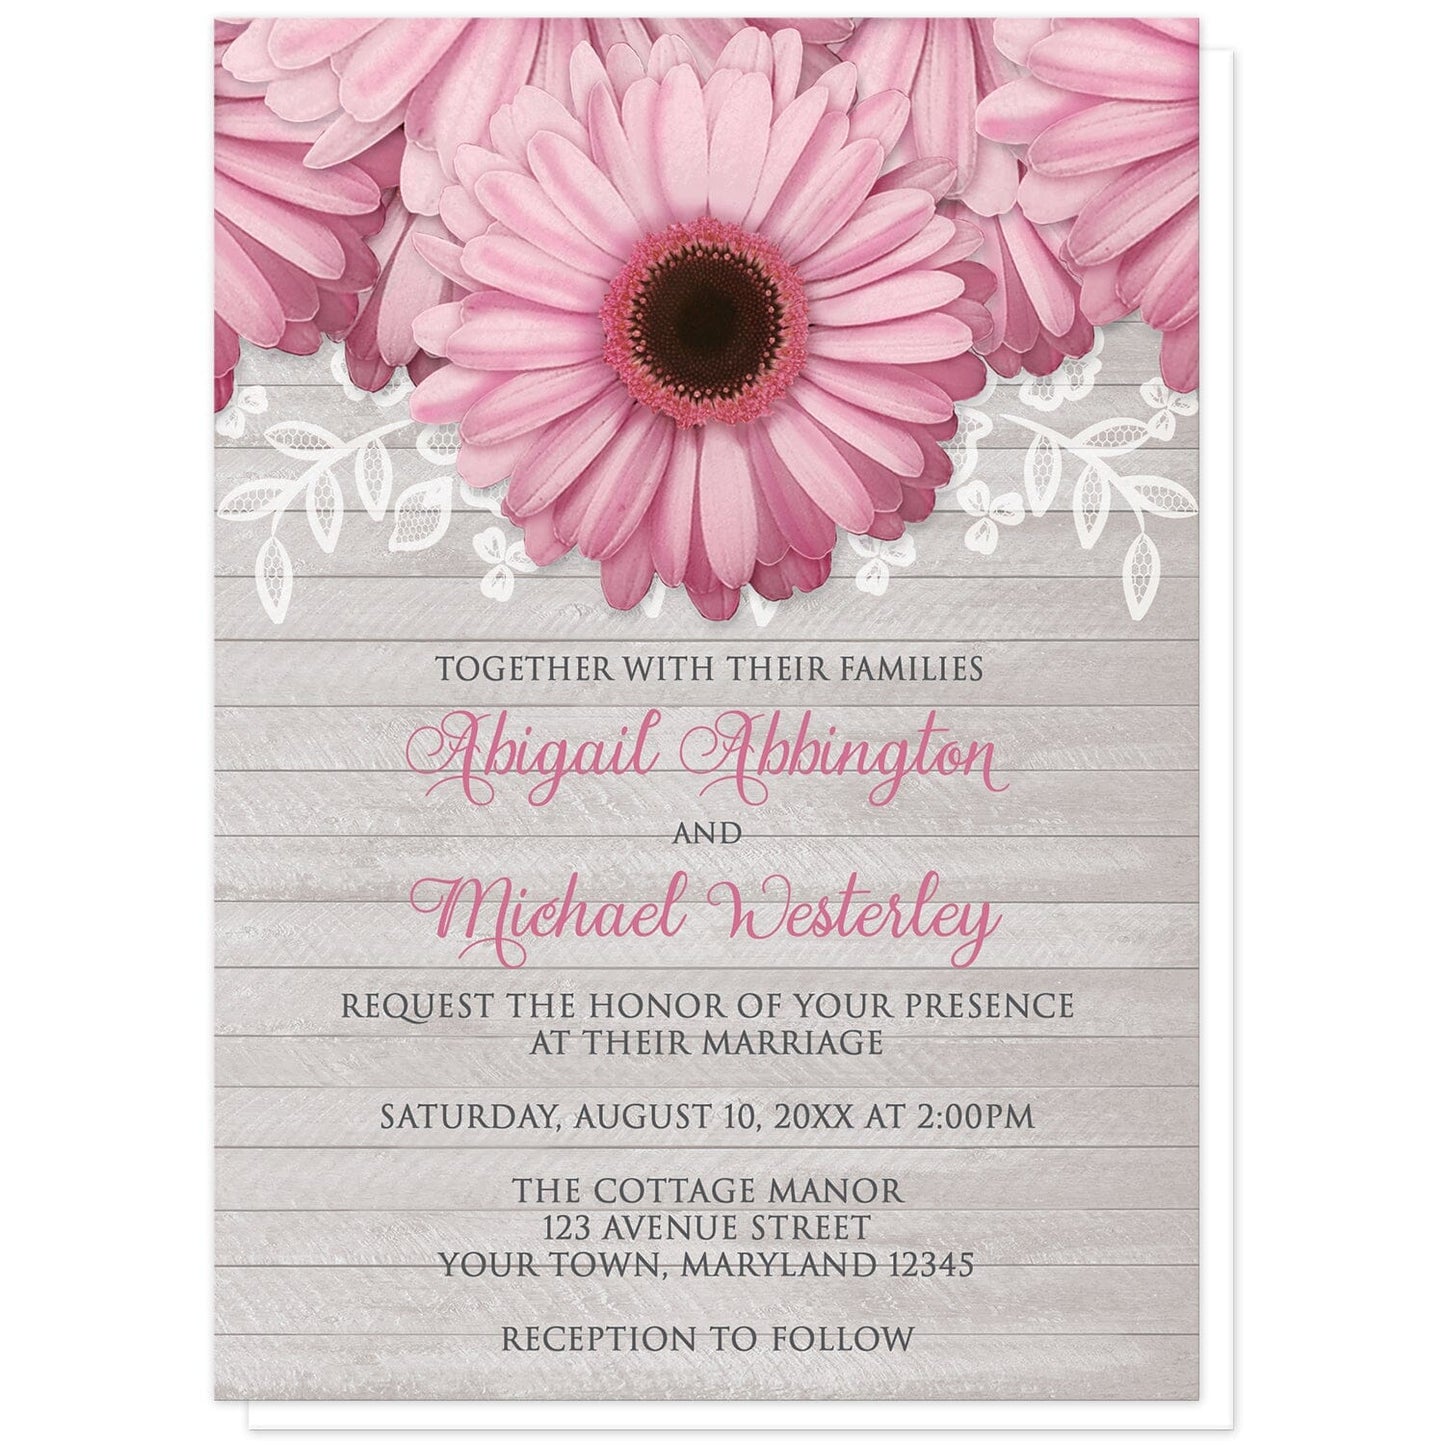 Rustic Pink Daisy Gray Wood Wedding Invitations at Artistically Invited. Rustic pink daisy gray wood wedding invitations designed with large and lovely pink daisy flowers with a white lace overlay along the top over a light gray wood background illustration. Your personalized marriage celebration details are custom printed in pink and dark gray over the wood background design below the pretty pink daisies.